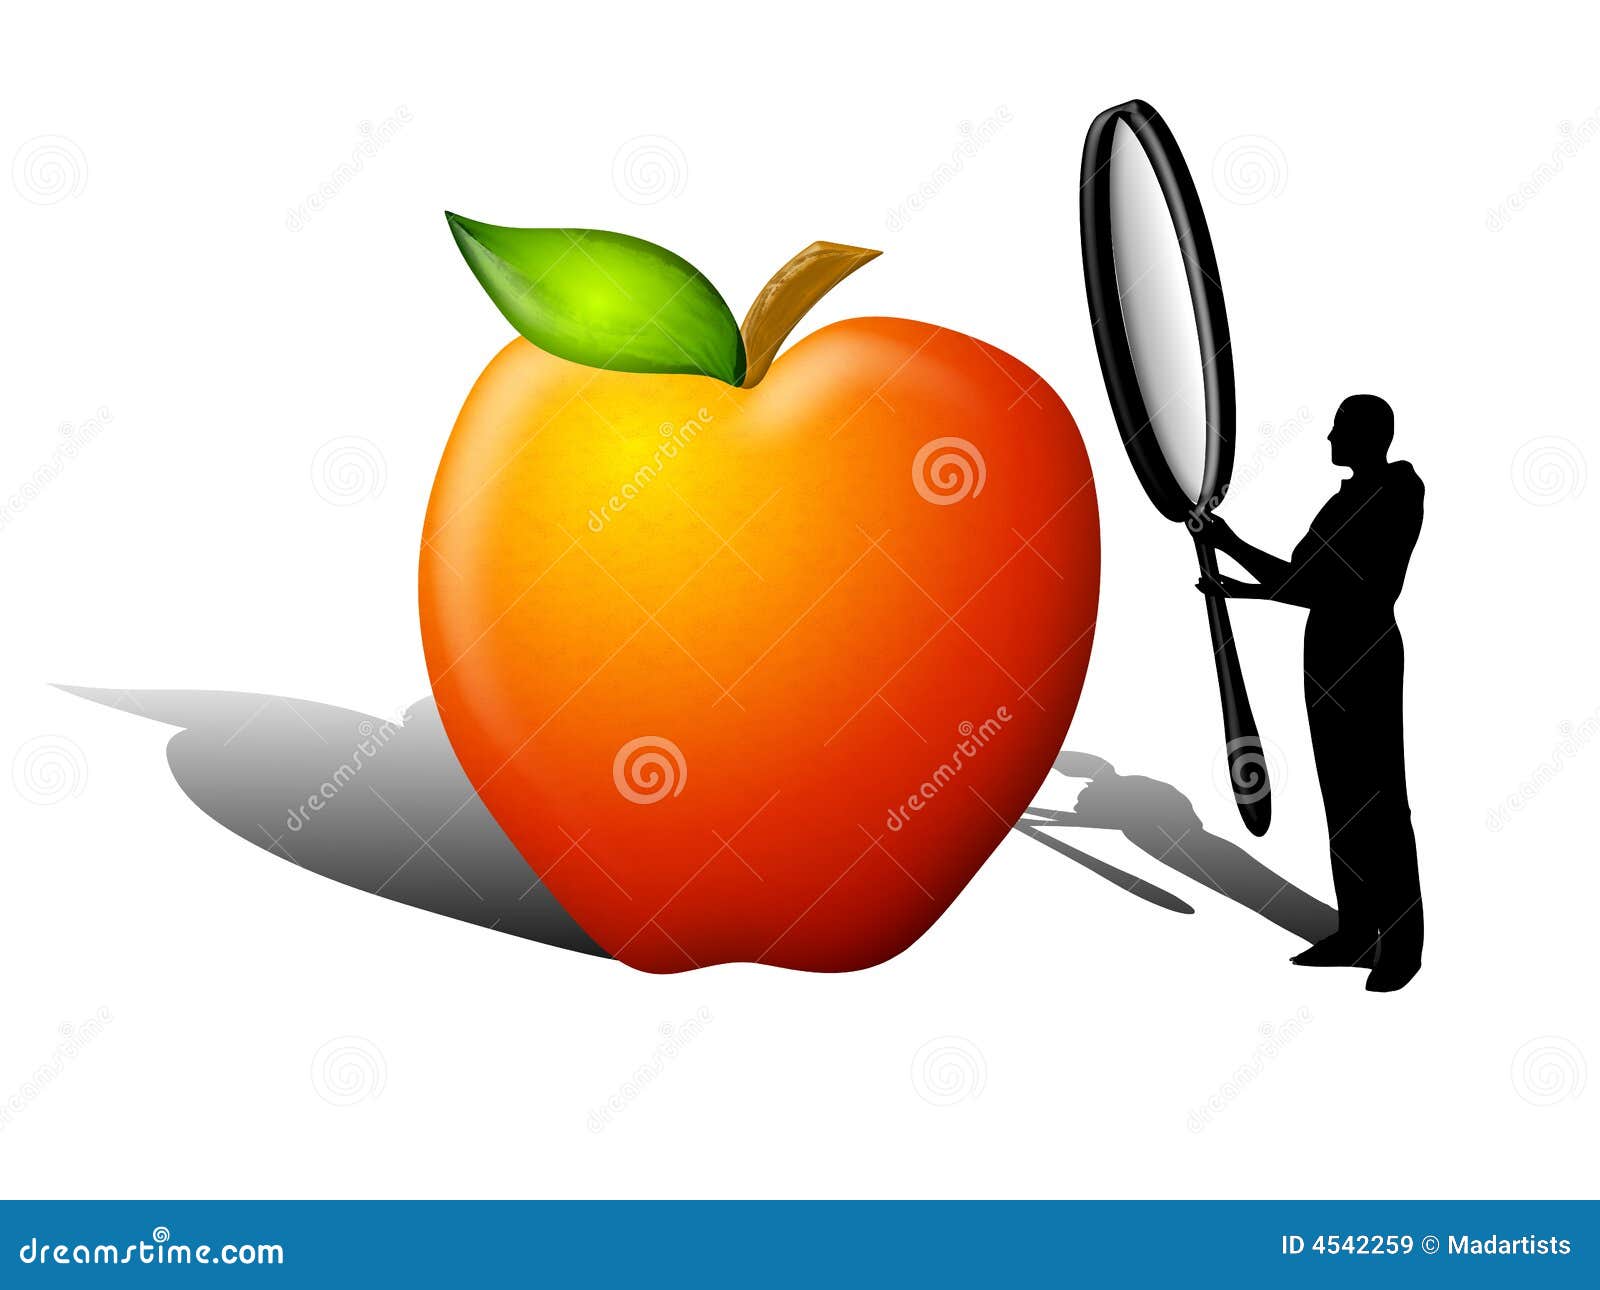 clipart representing quality - photo #14